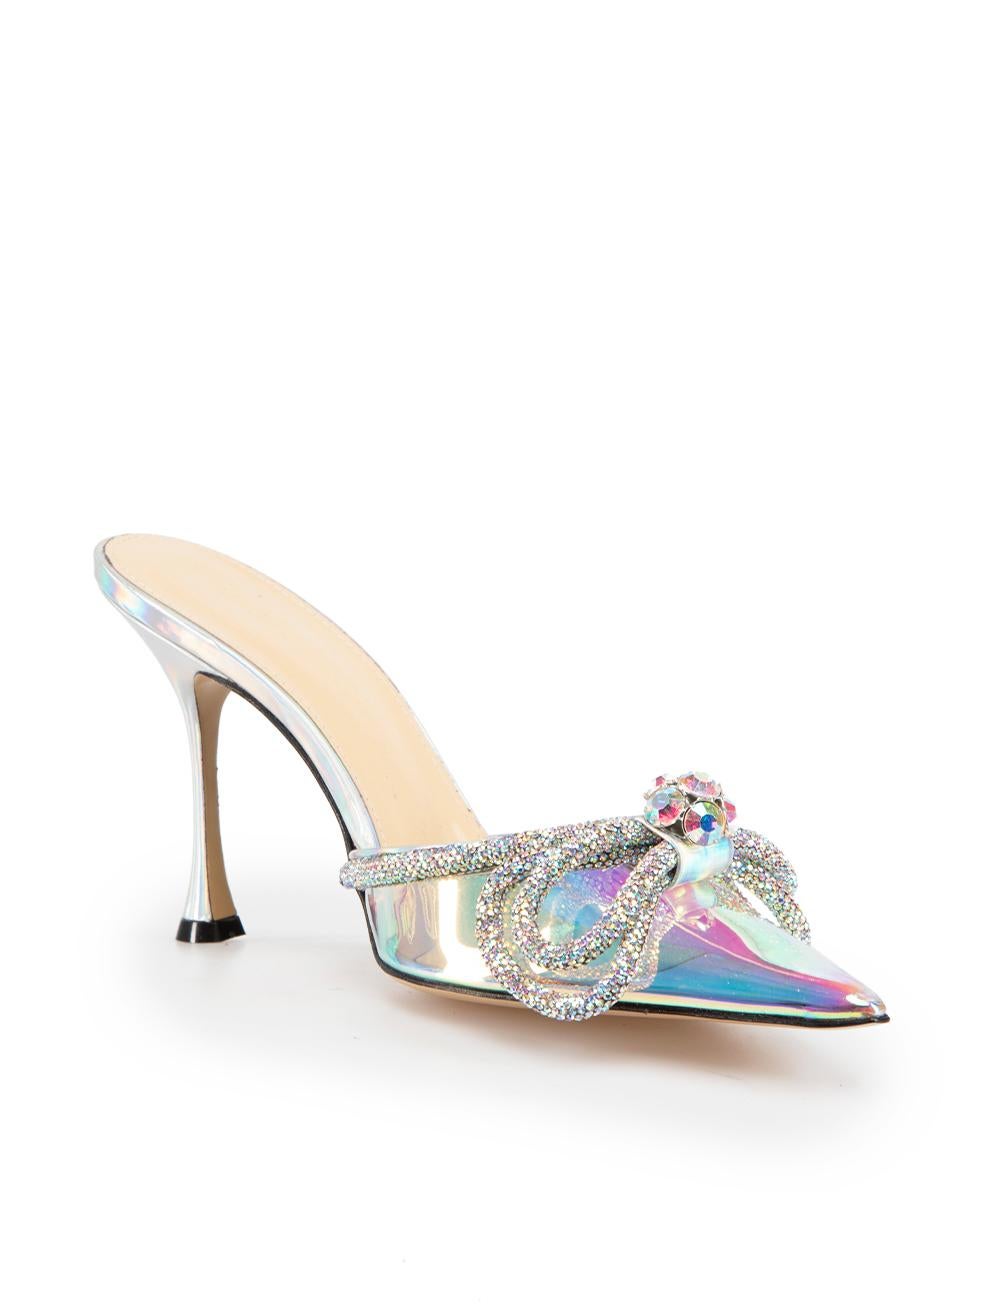 CONDITION is Never worn. No visible wear to shoes is evident on this new Mach & Mach designer resale item.

Details
Silver iridescent
PVC
Mules
Point toe
High heeled
Crystal embellished
Bow detail
Made in Italy

Composition
EXTERIOR: PVC
INTERIOR: